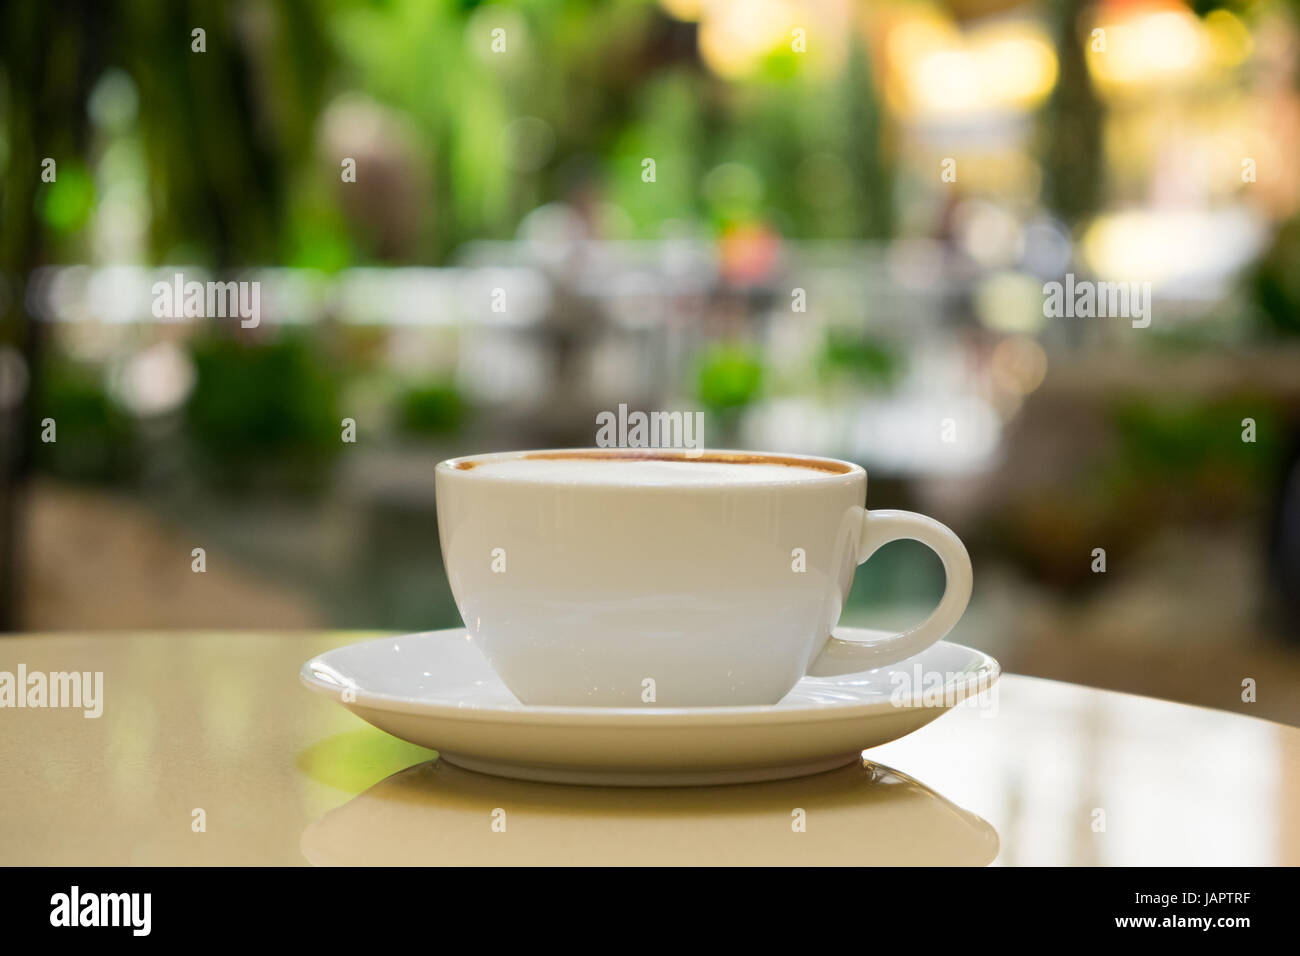 Coffee cup on the table Stock Photo